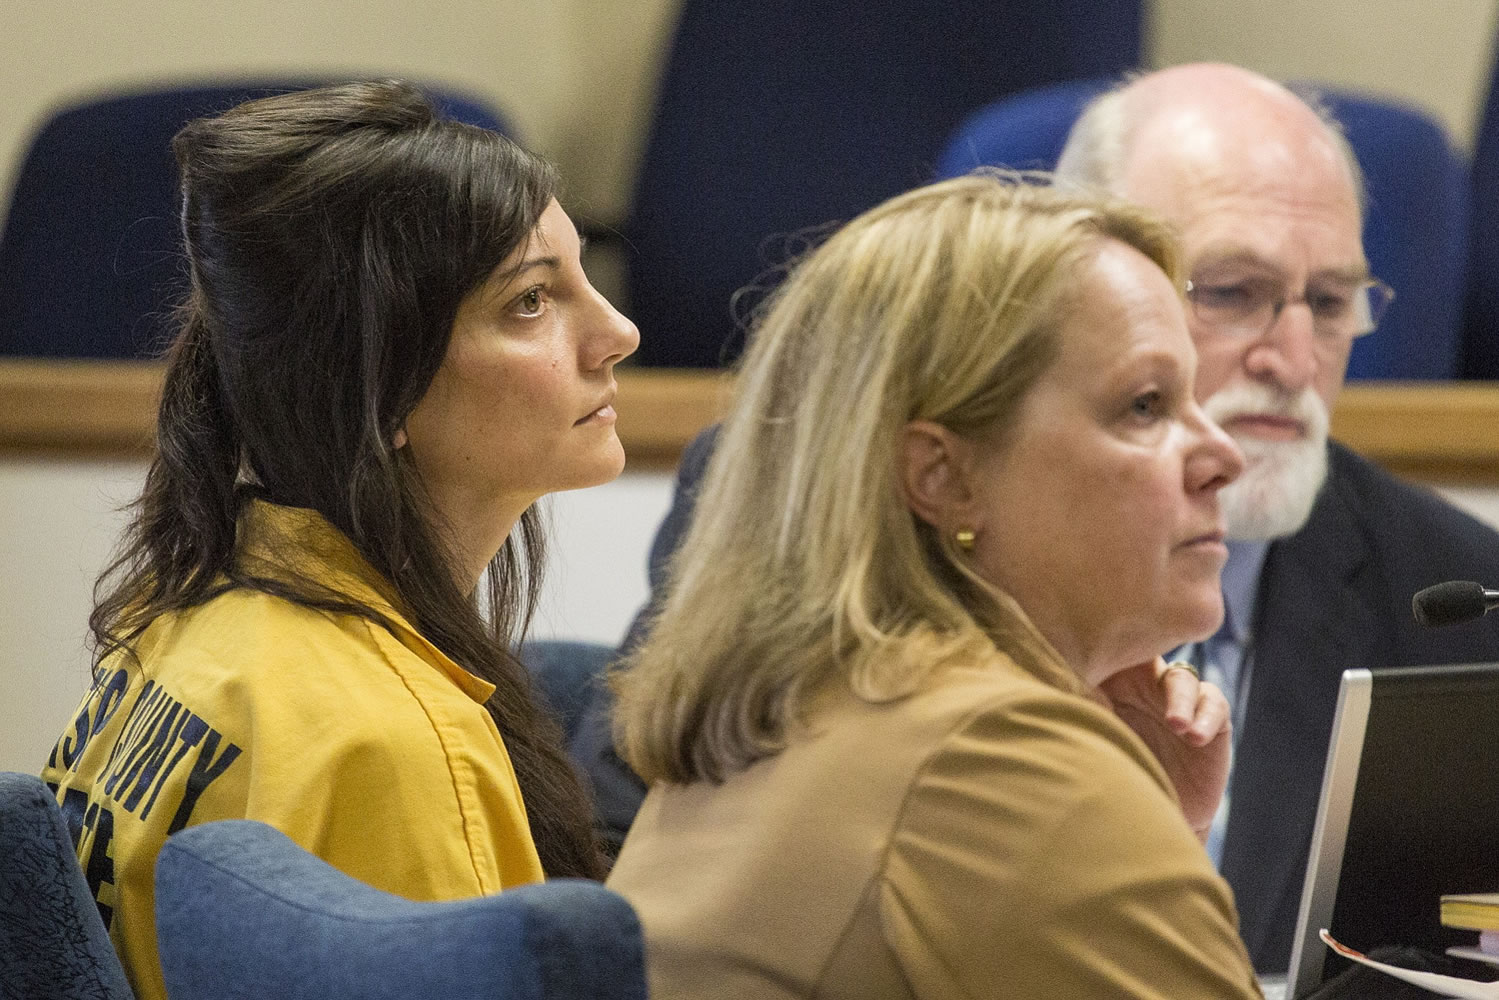 Jessica Smith sits next to defense attorneys William Falls, back, and Lynne Morgan, foreground, at the Clatsop County Courthouse for a status hearing Tuesday in Astoria, Ore.